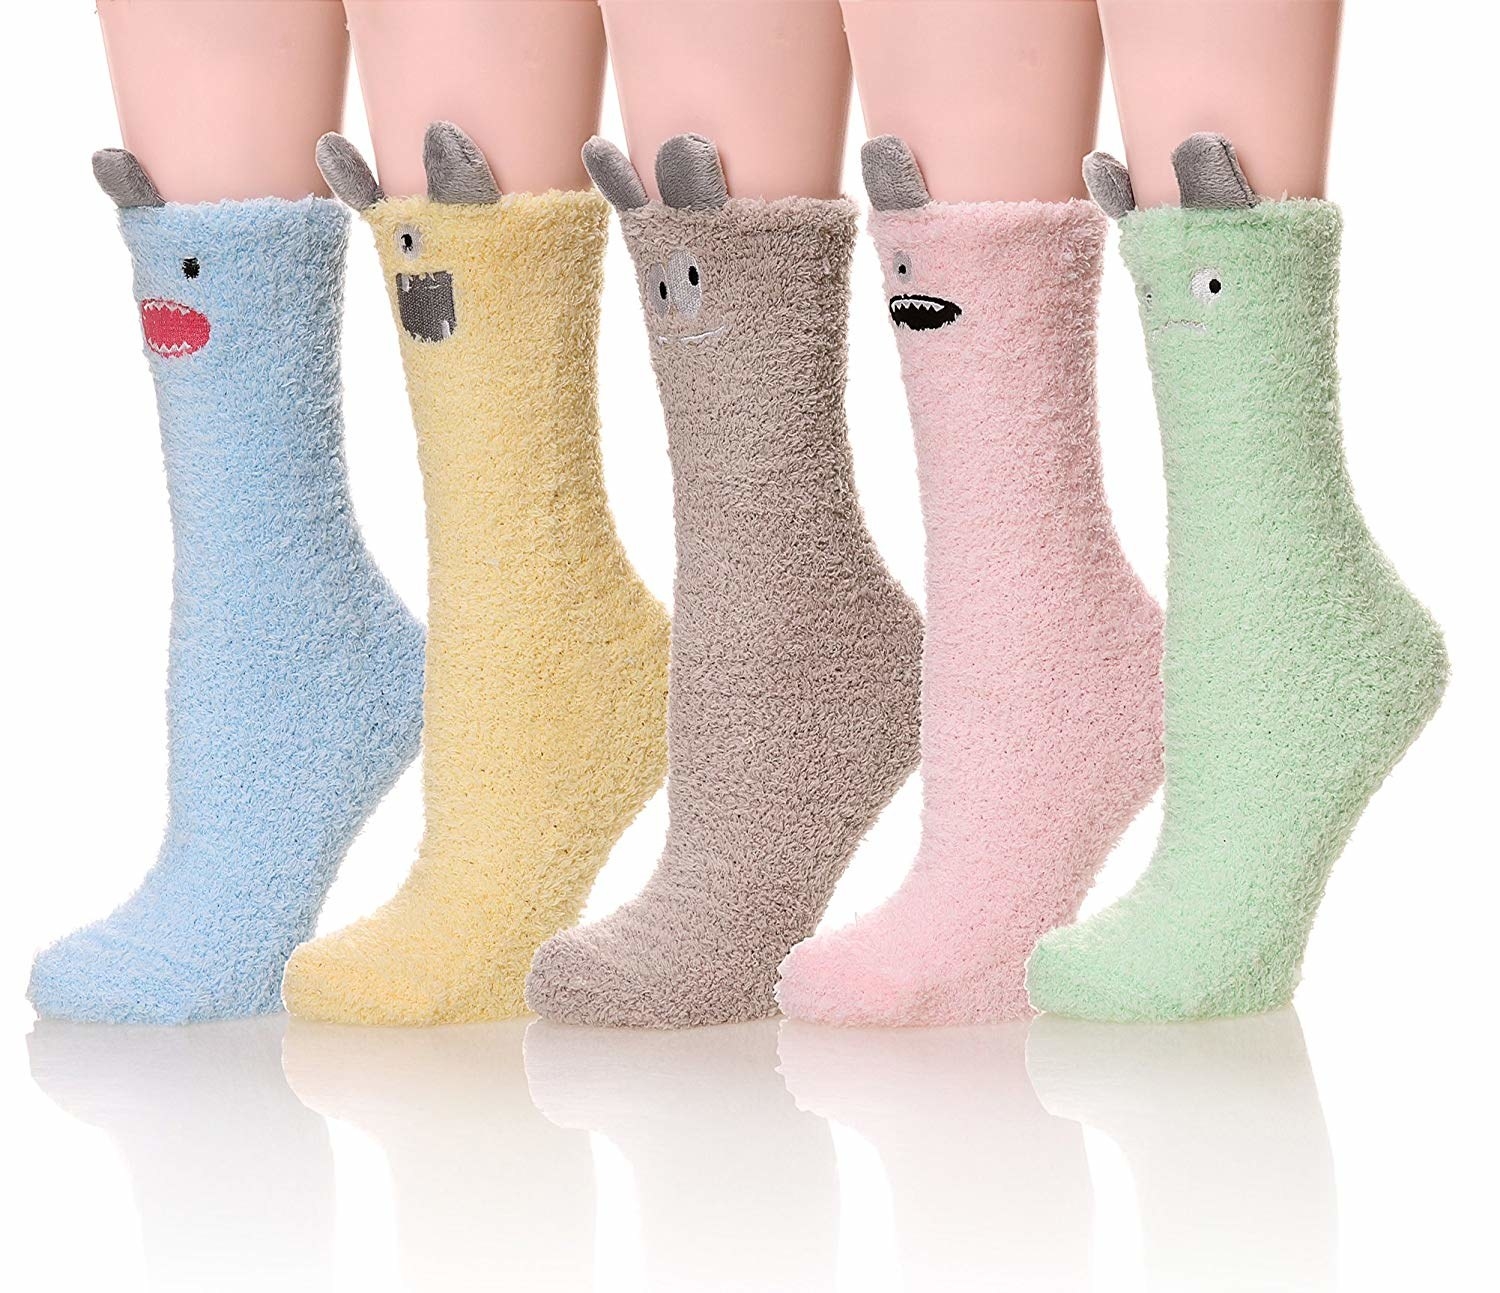 The five pairs of socks in different colors (blue yellow, tan, pink, and green) with ears and different facial expressions